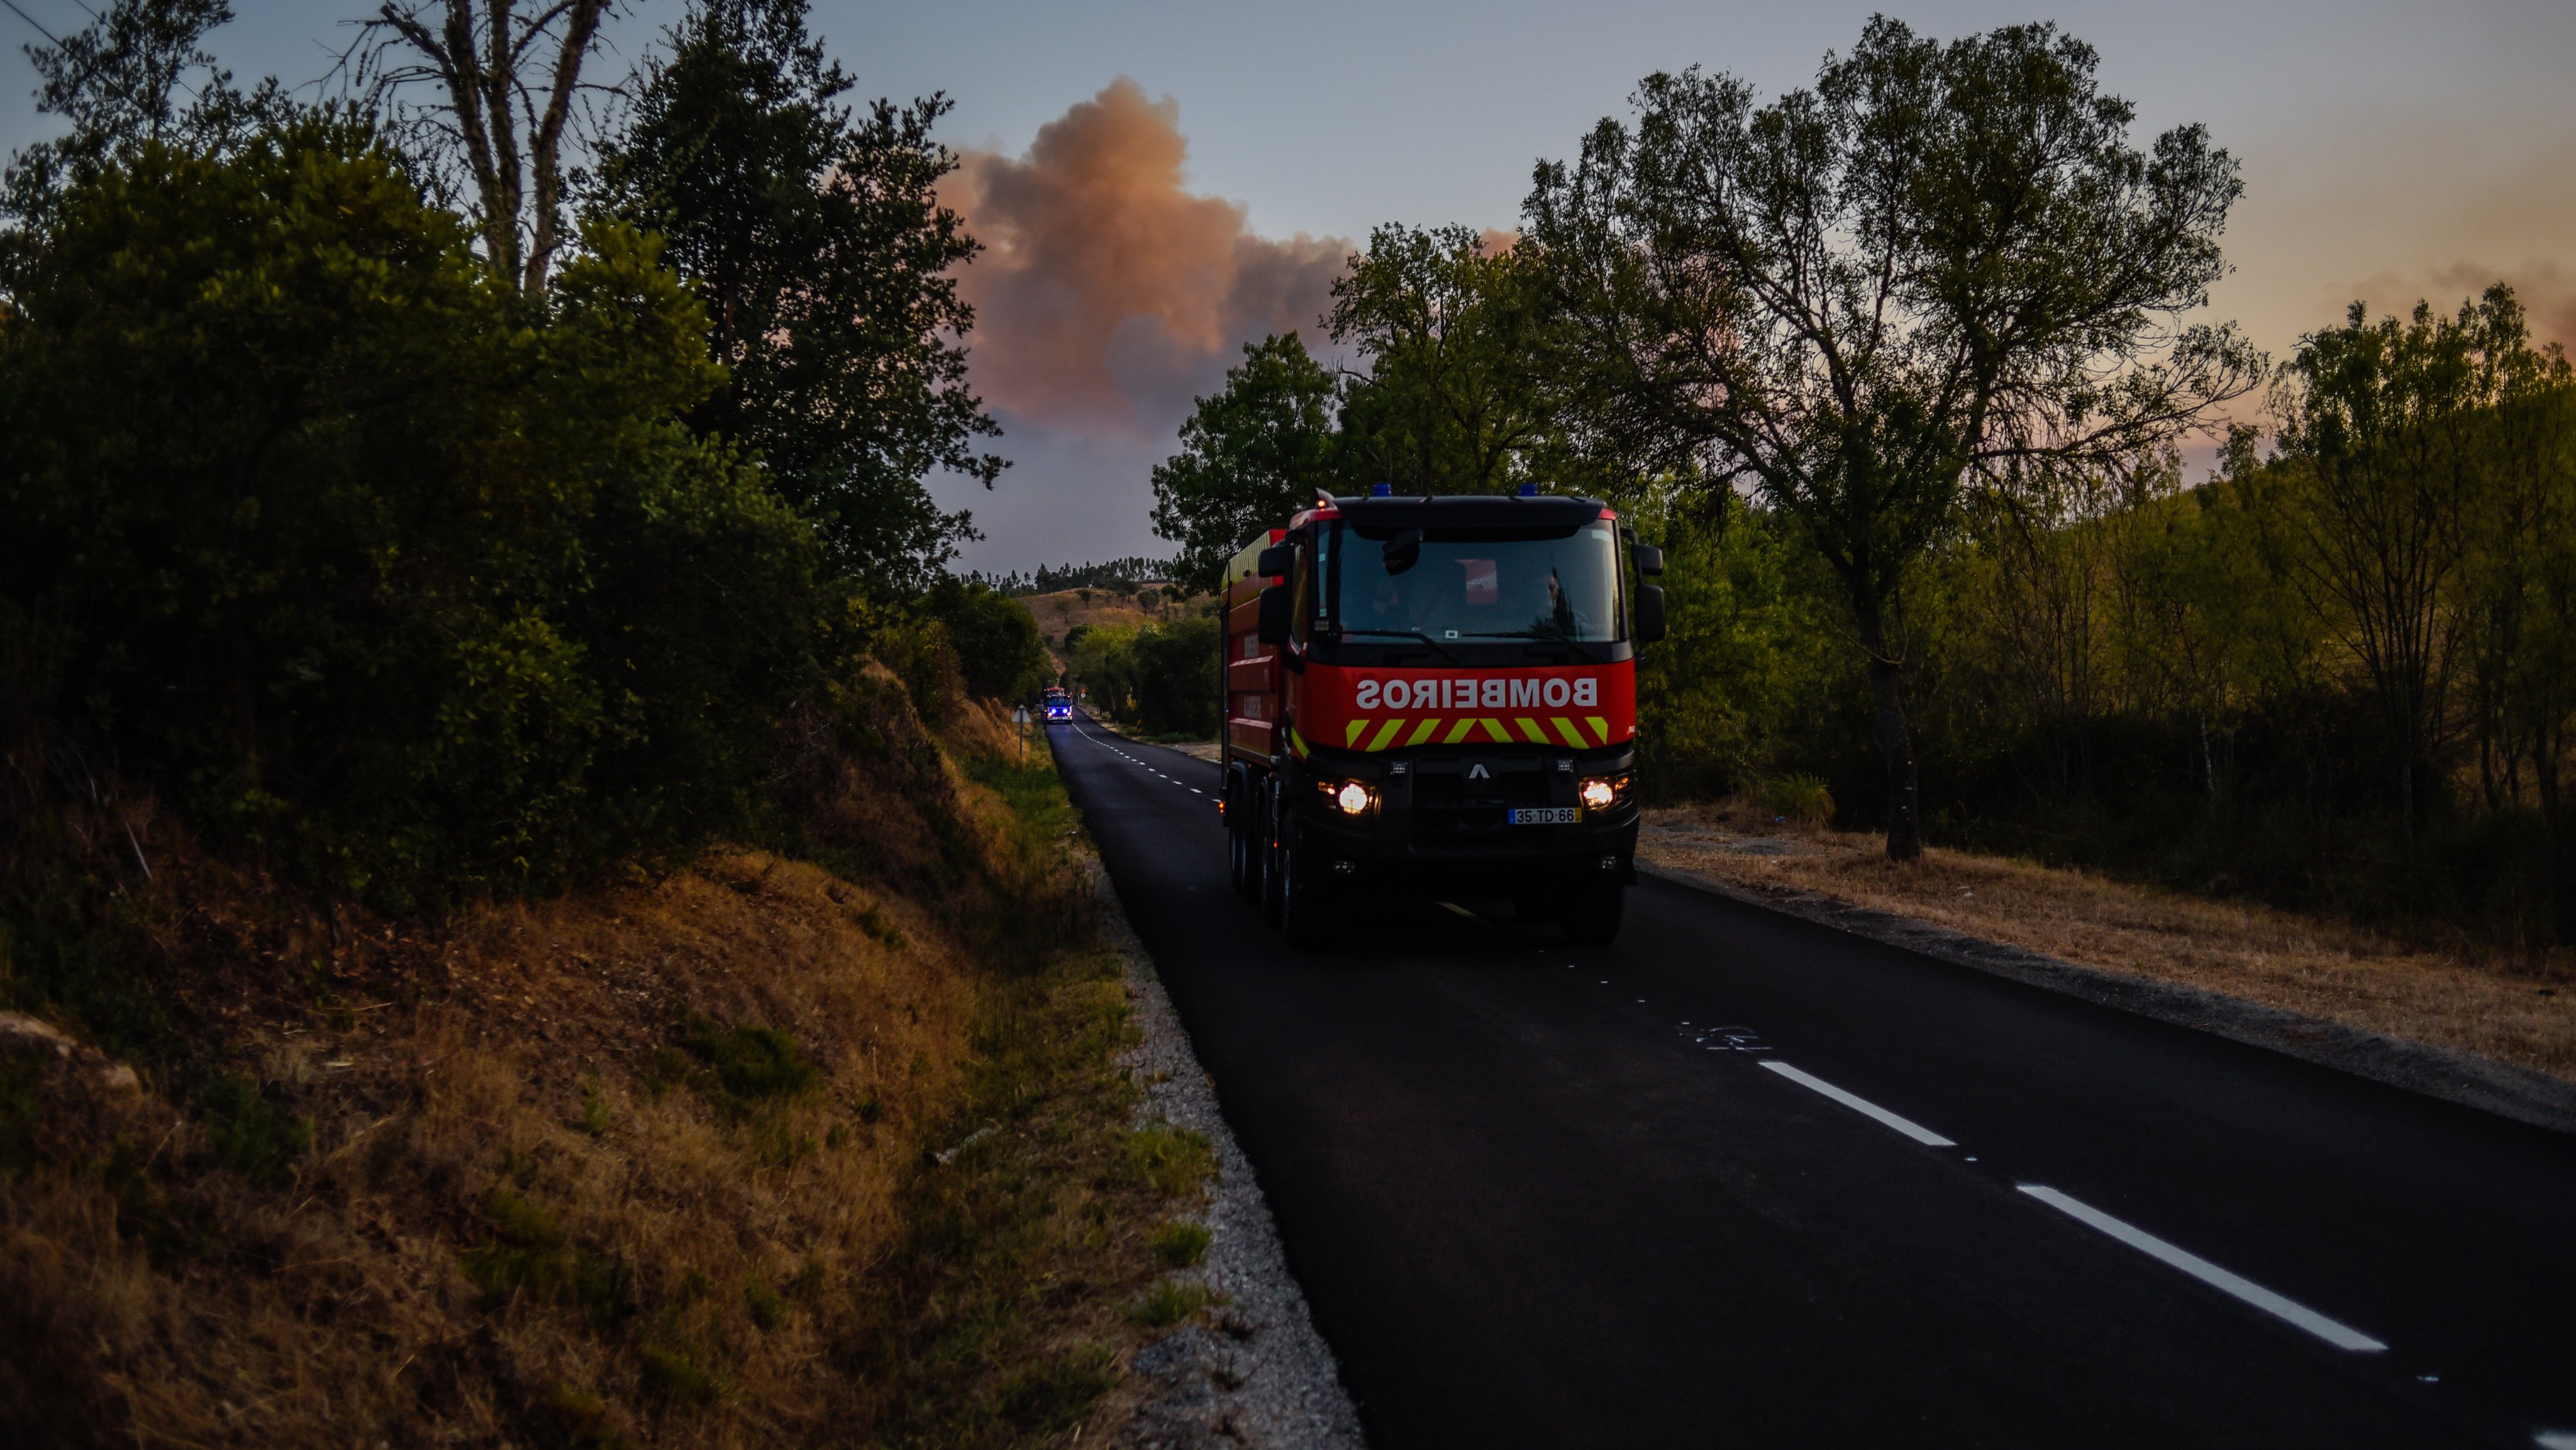 Wildfires rage in Southern Portugal